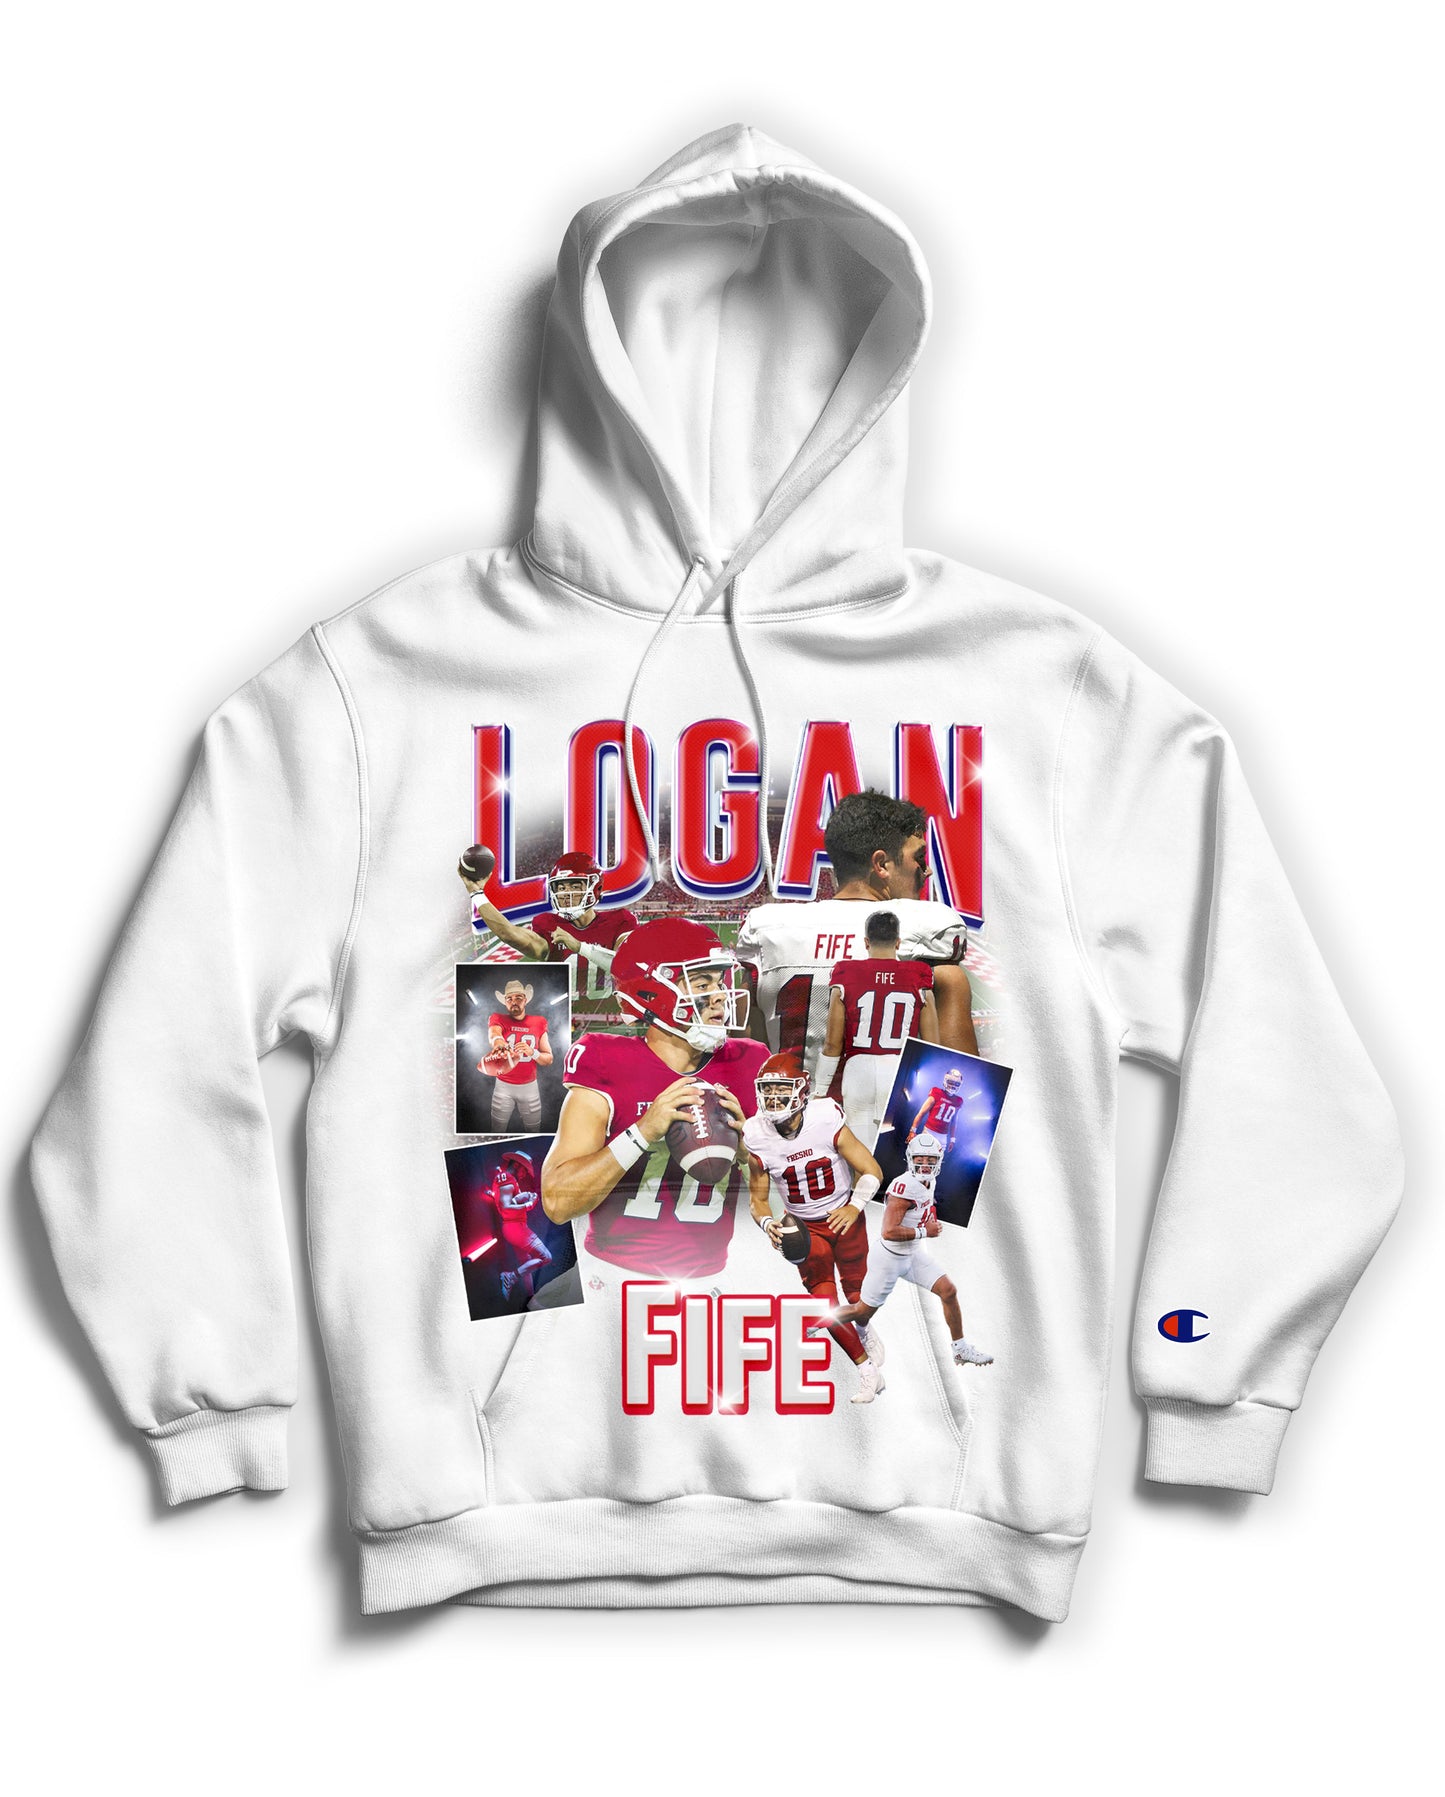 Logan "10" Fife Tribute Hoodie *LIMITED EDITION* (Black & White)